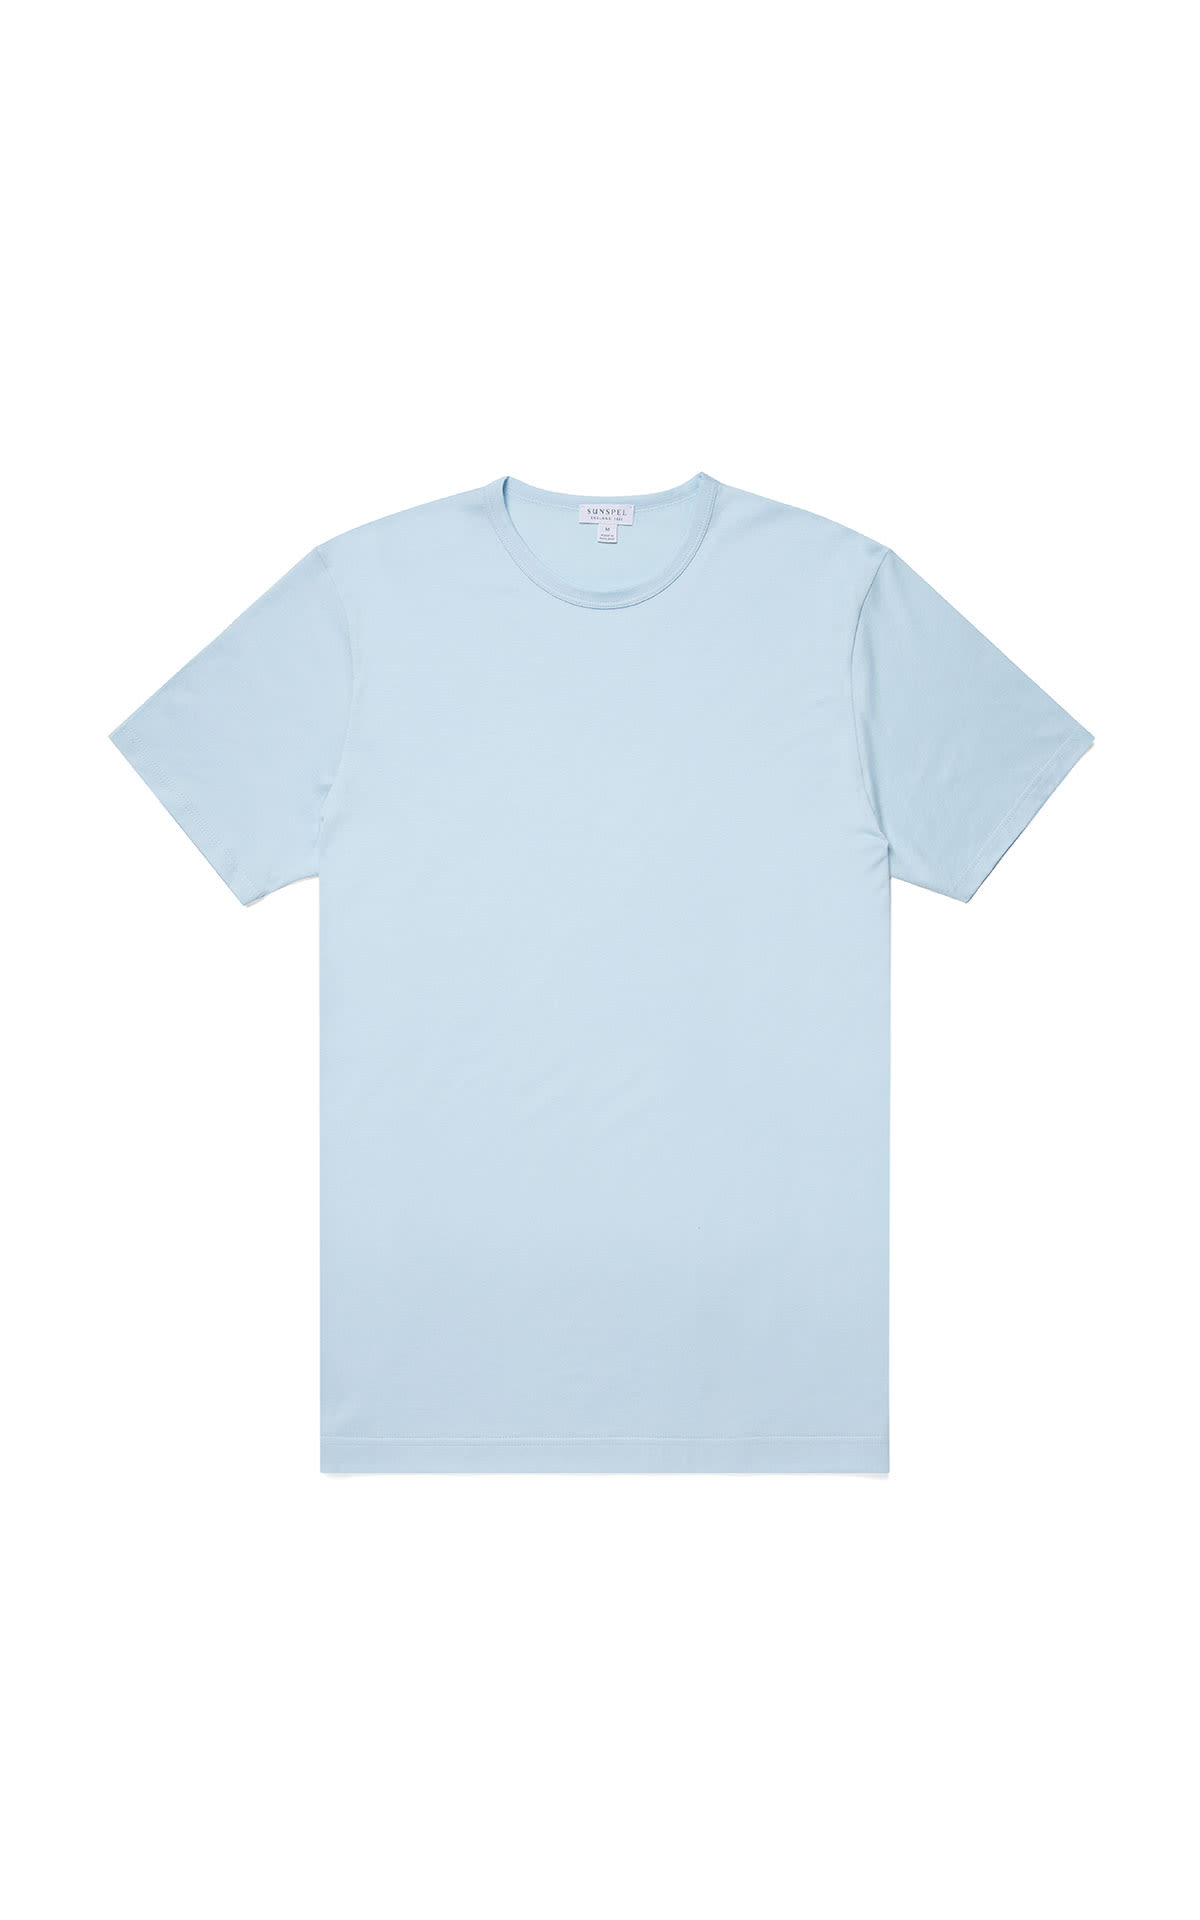 Sunspel Classic t-shirt in ice from Bicester Village